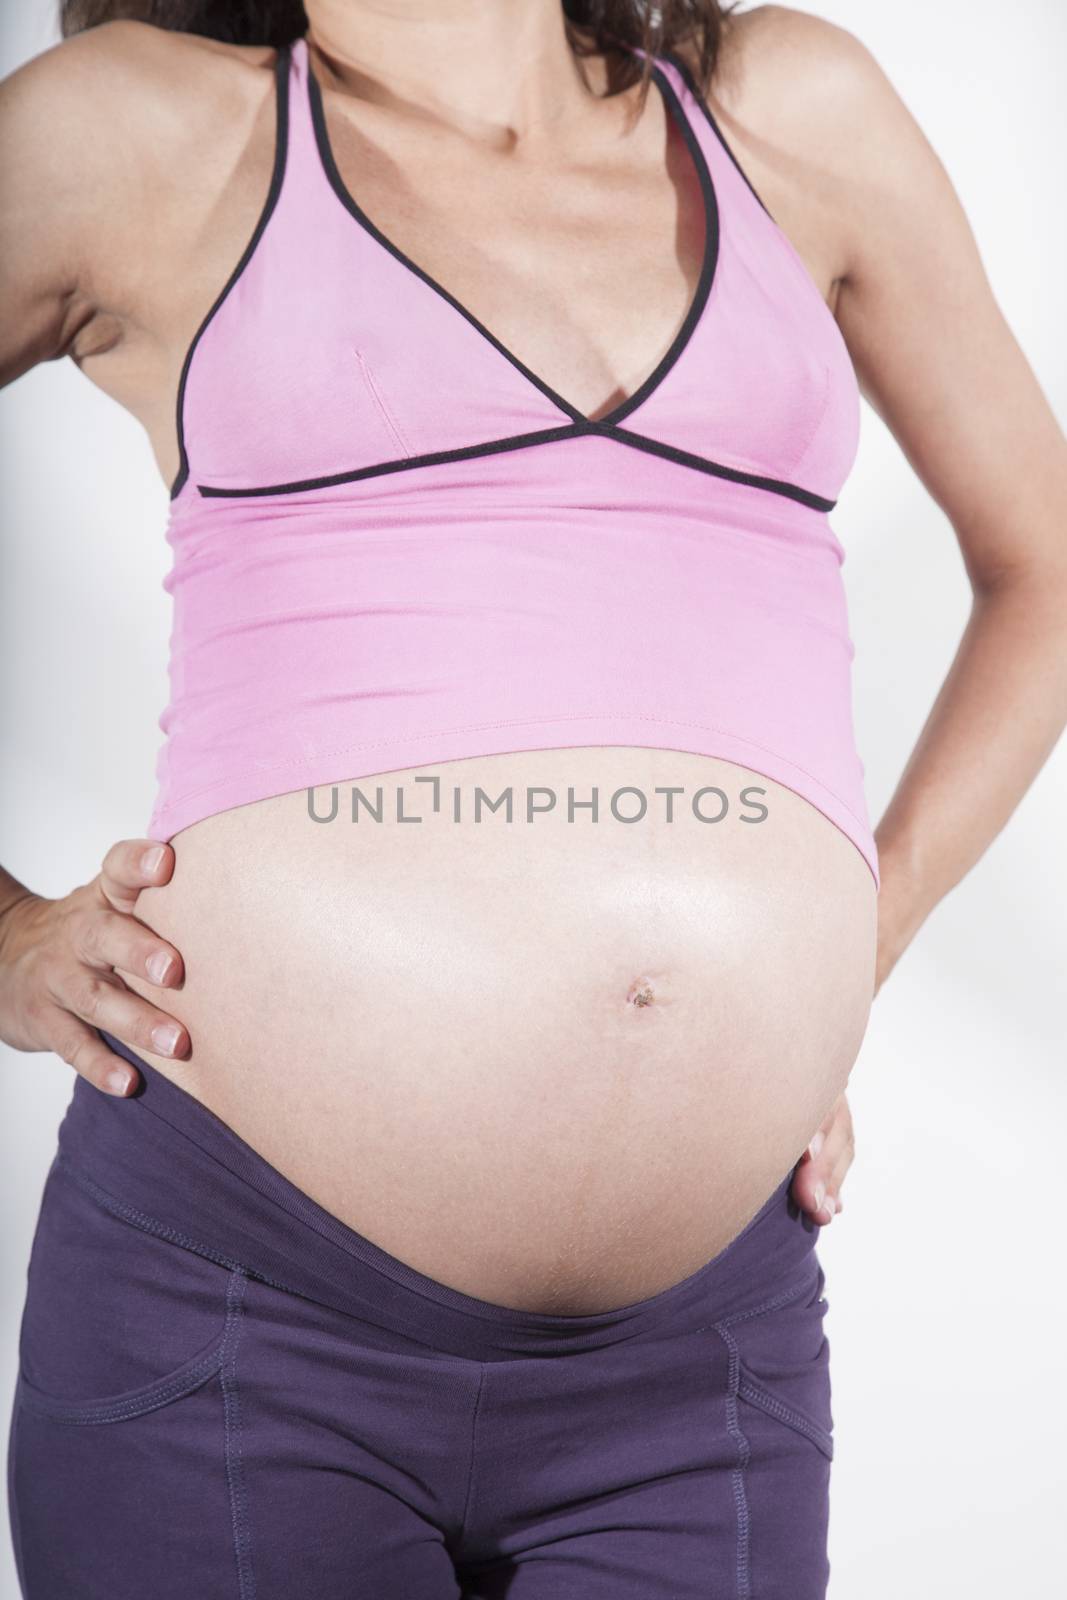 eight month brunette pregnant woman naked paunch belly button pink shirt purple trousers hands on hips standing isolated on white